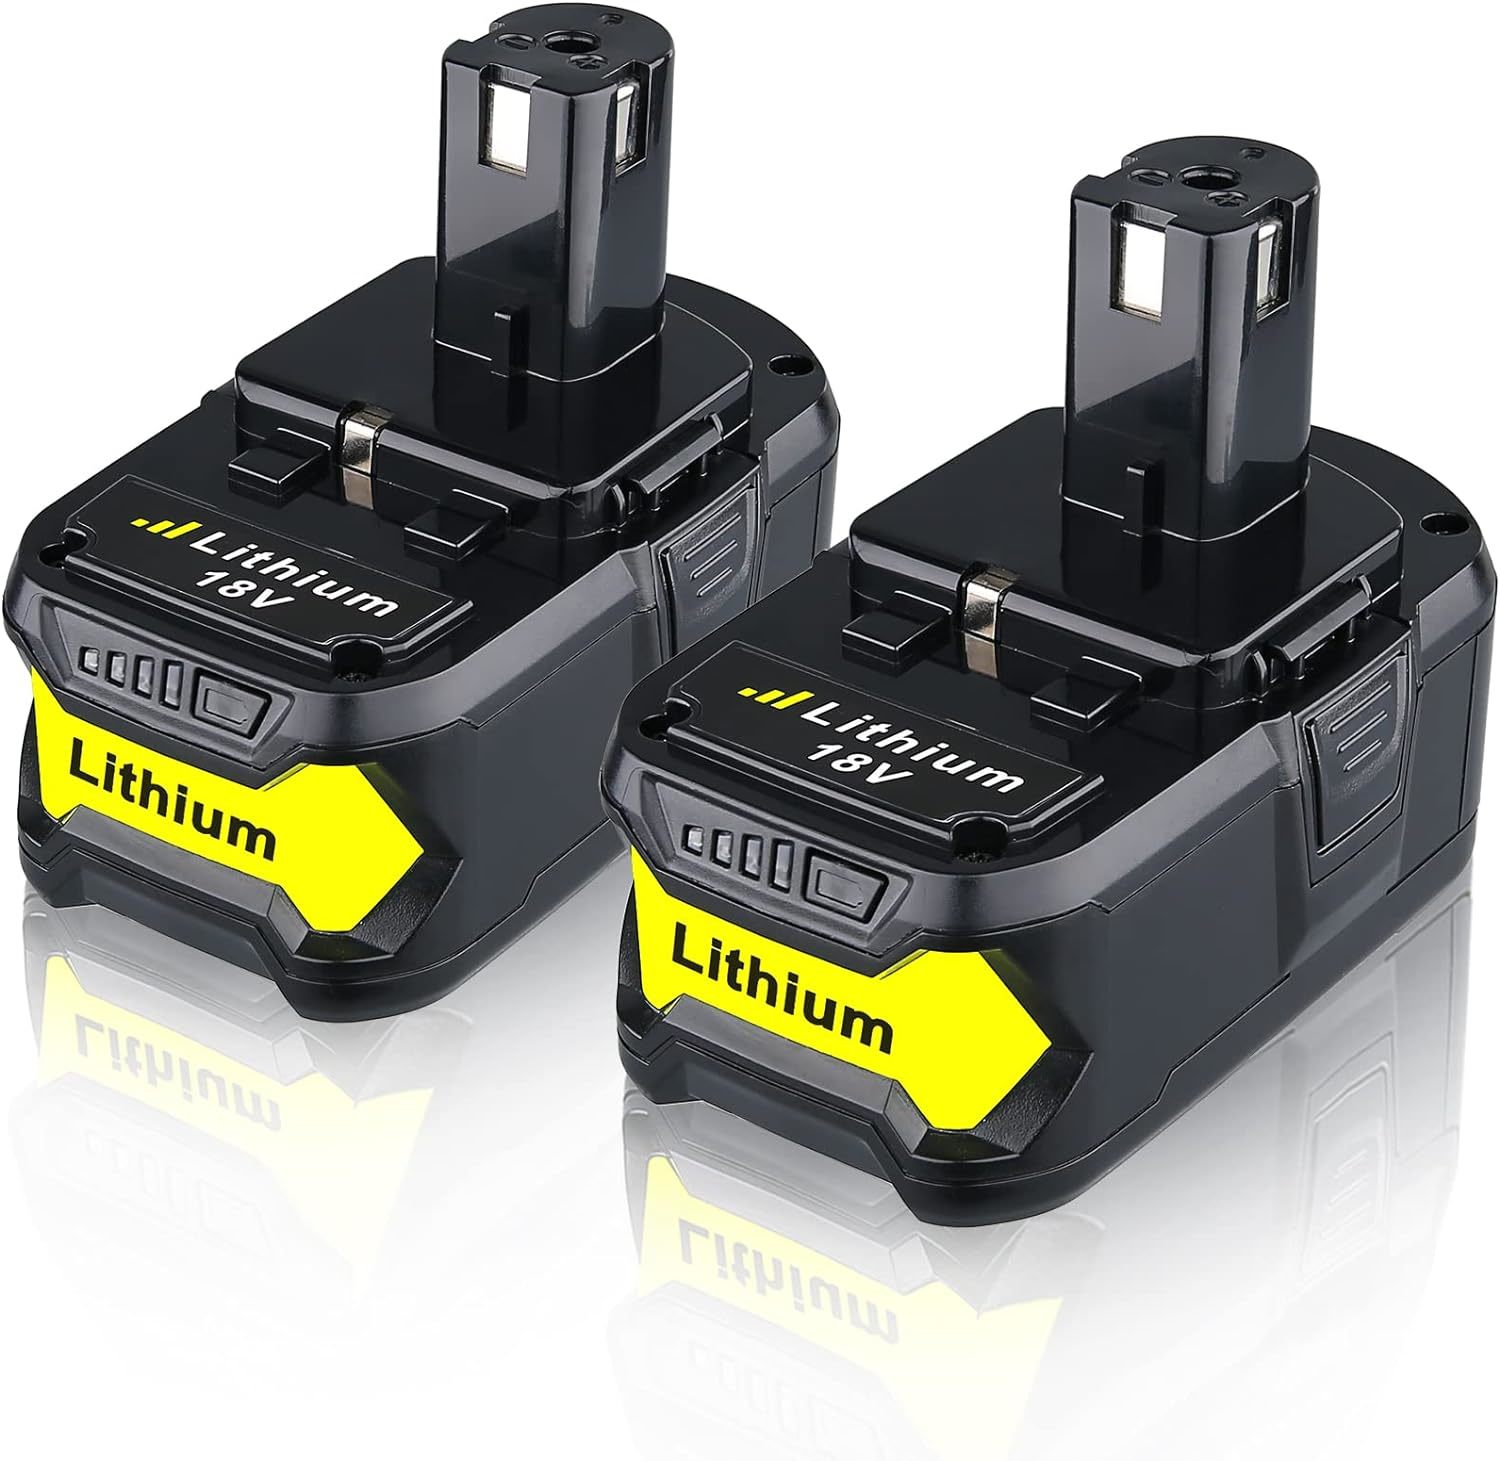 2 Packs 4.0Ah Ni-Mh 18 Volt HPB18 Battery and Charger Compatible